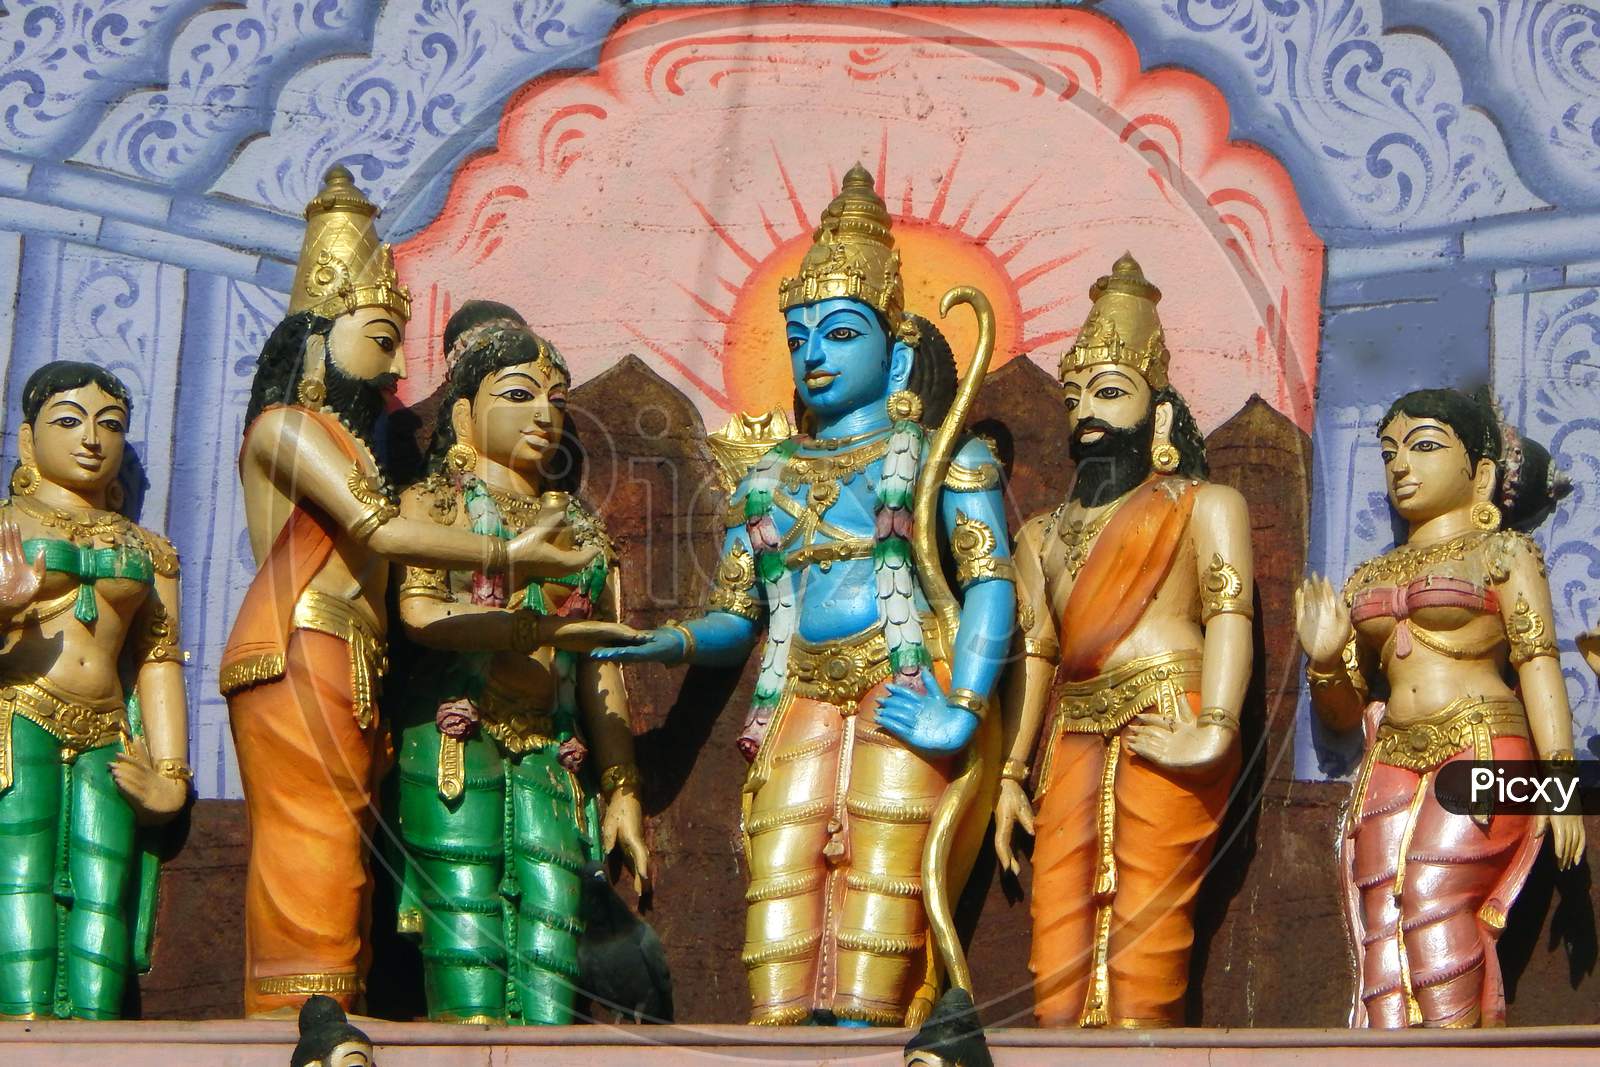 Indian God Rama And Goddess Sita Statues In Marriage Function, In A Temple